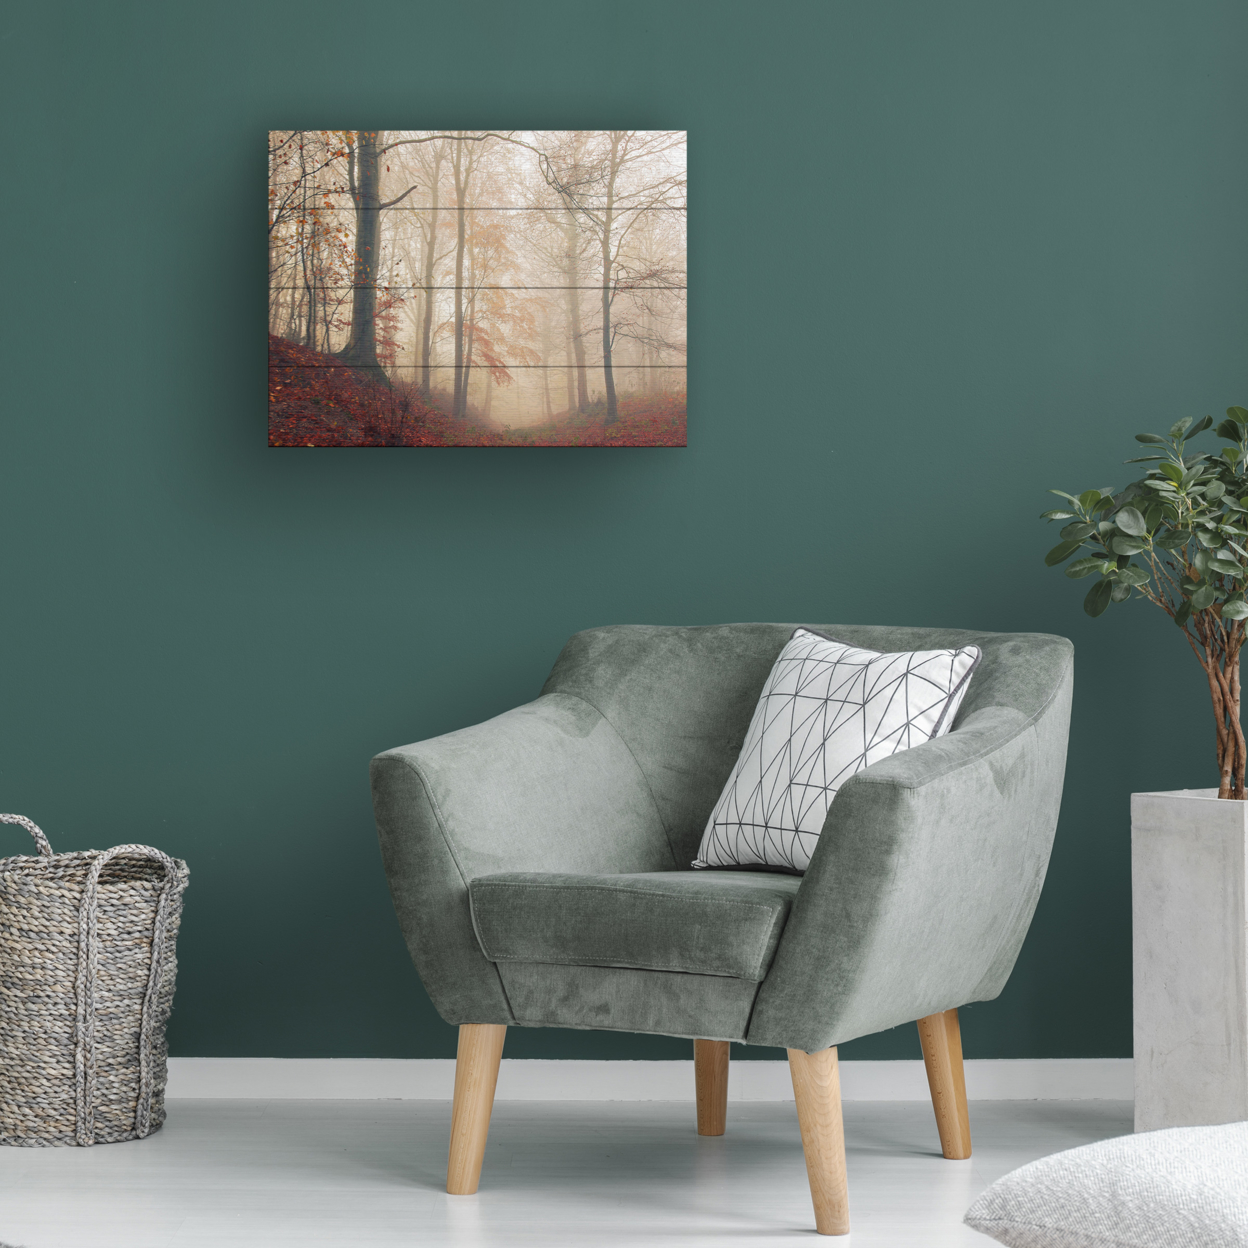 Wall Art 12 X 16 Inches Titled Waiting For The Deer Ready To Hang Printed On Wooden Planks